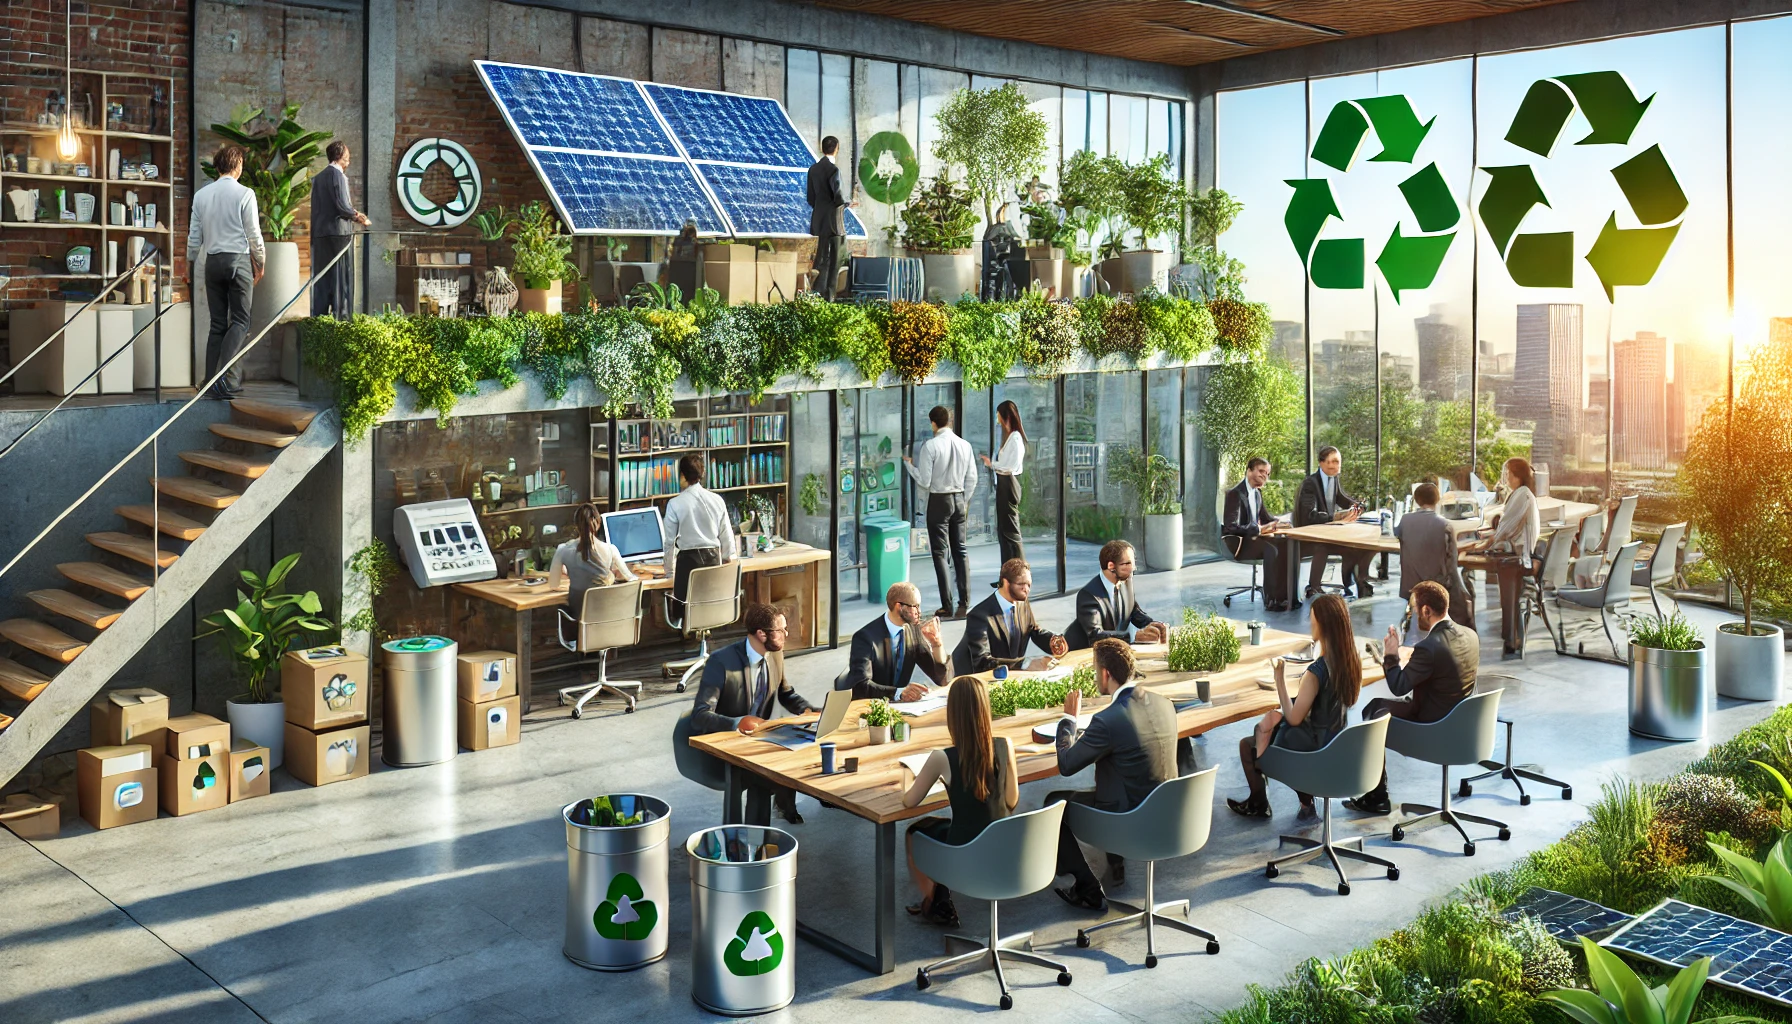 Professionals implementing sustainable business practices in an eco-friendly office environment with solar panels and recycling bins.